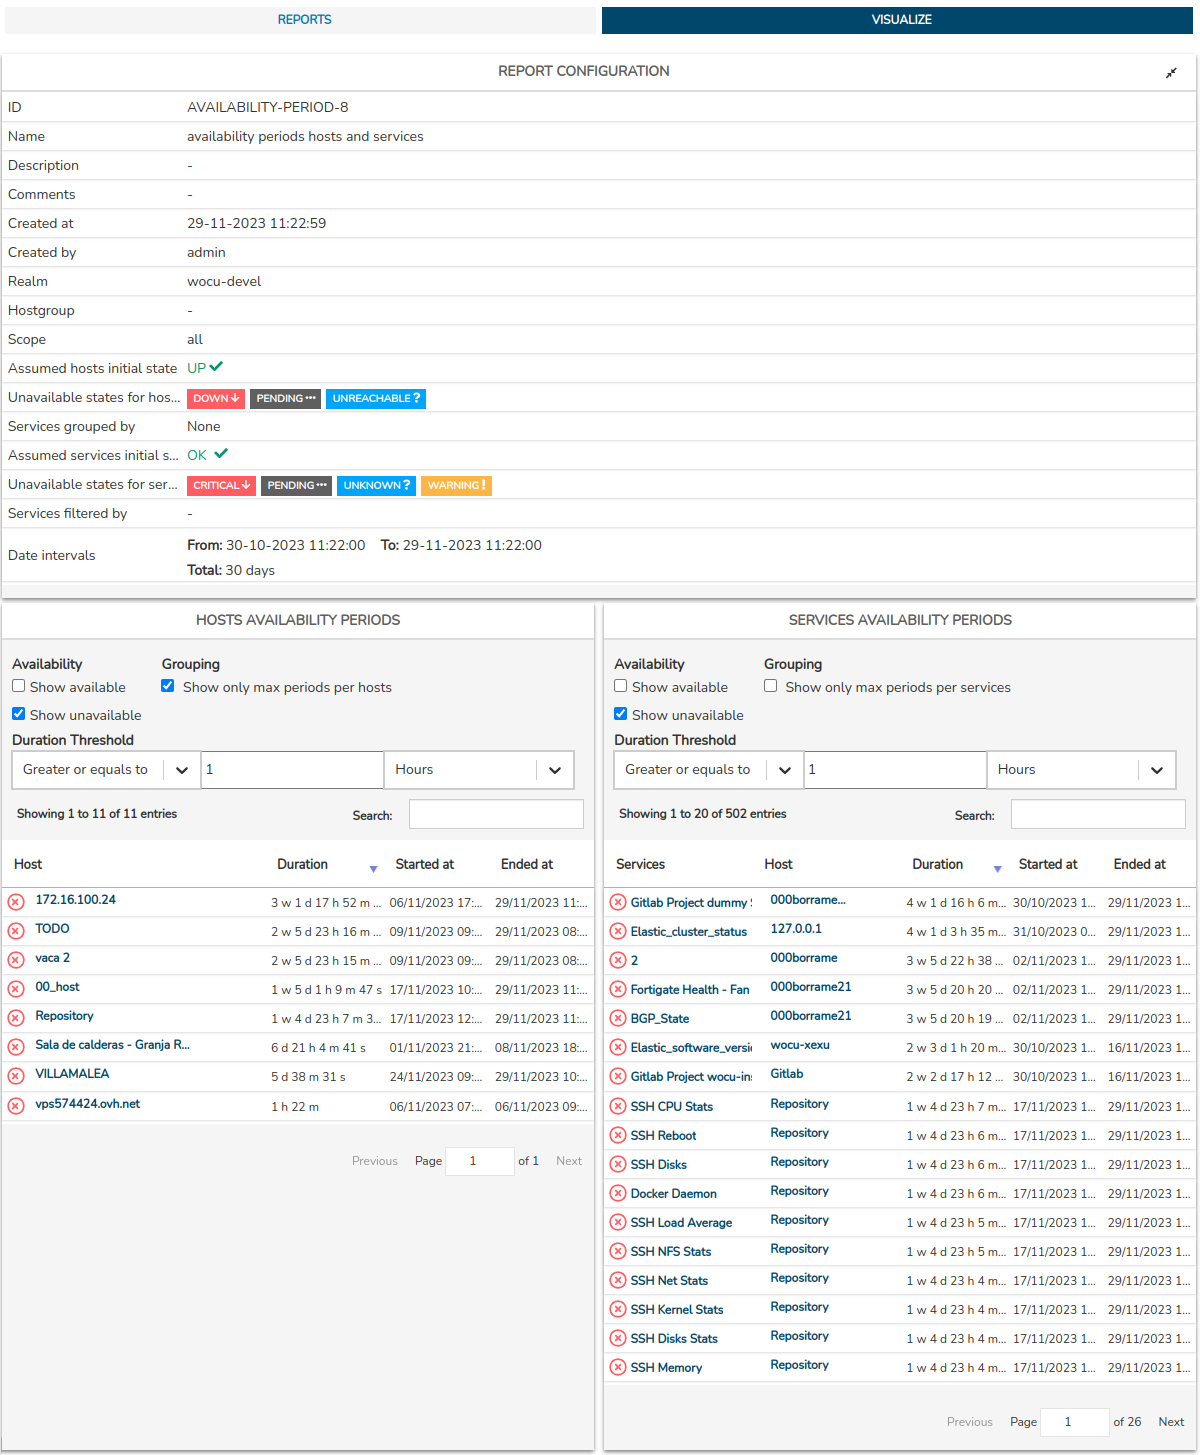 ../../_images/3_096_aggregator_realm_reports_visualize_availability_periods_0-58.png